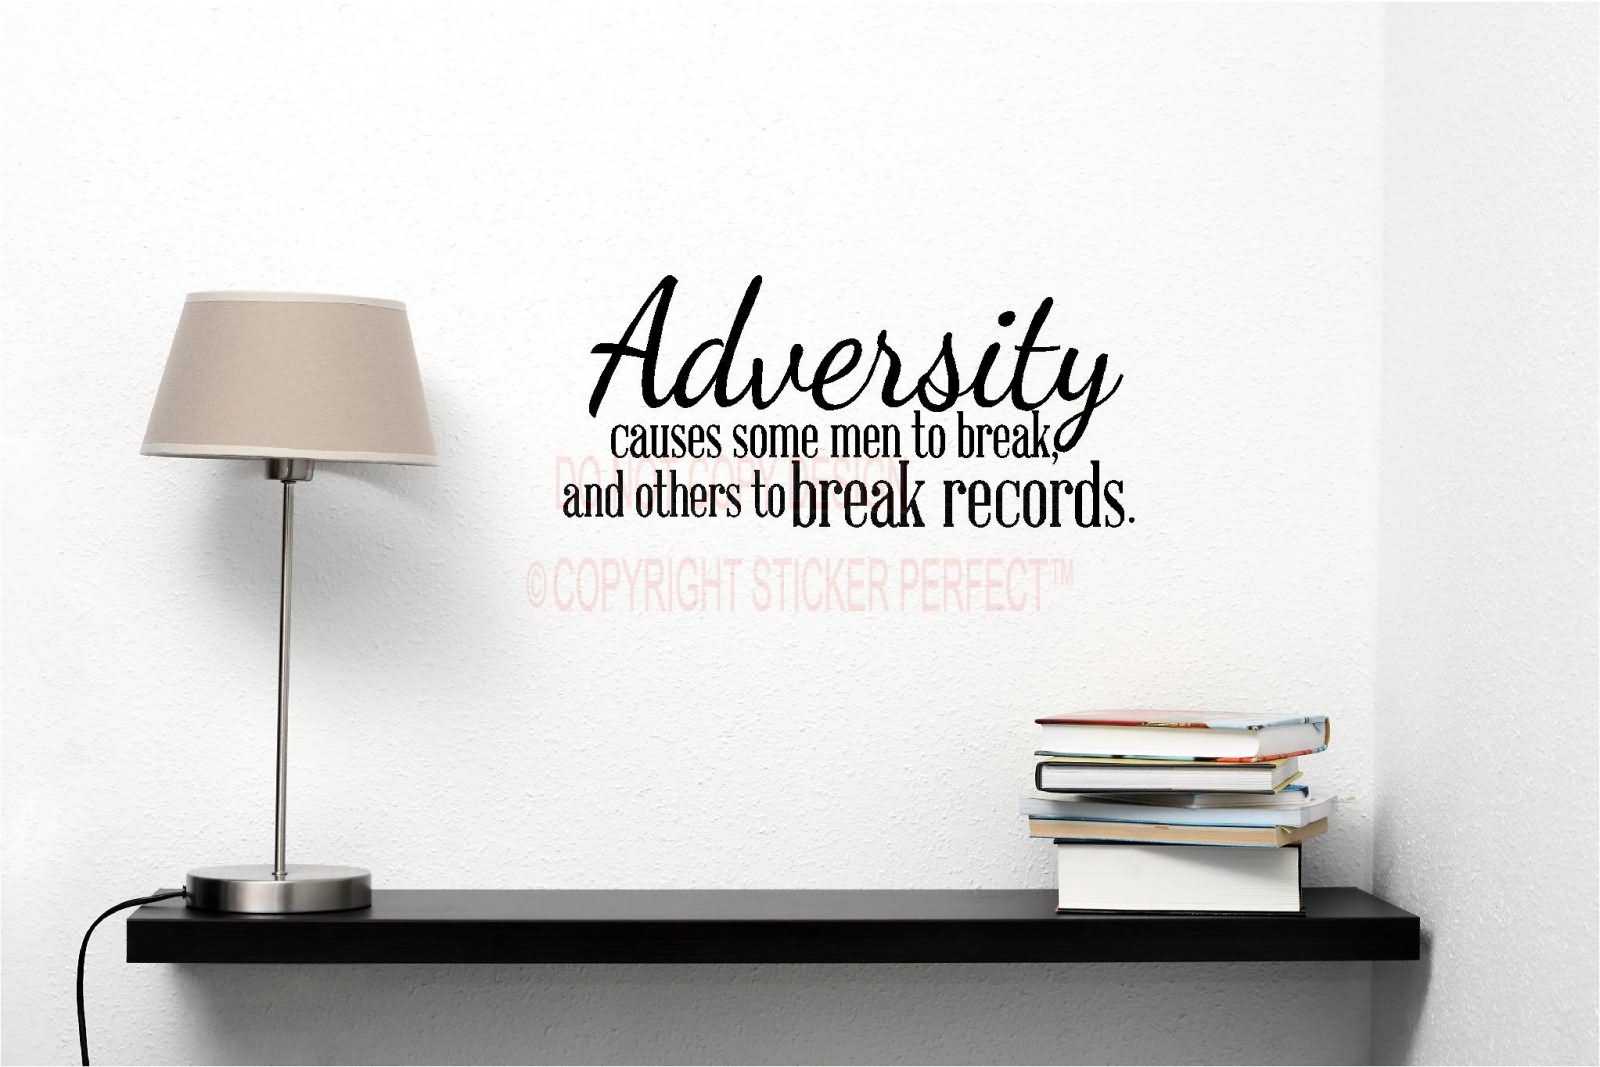 Adversity causes some men to break and others to break records.